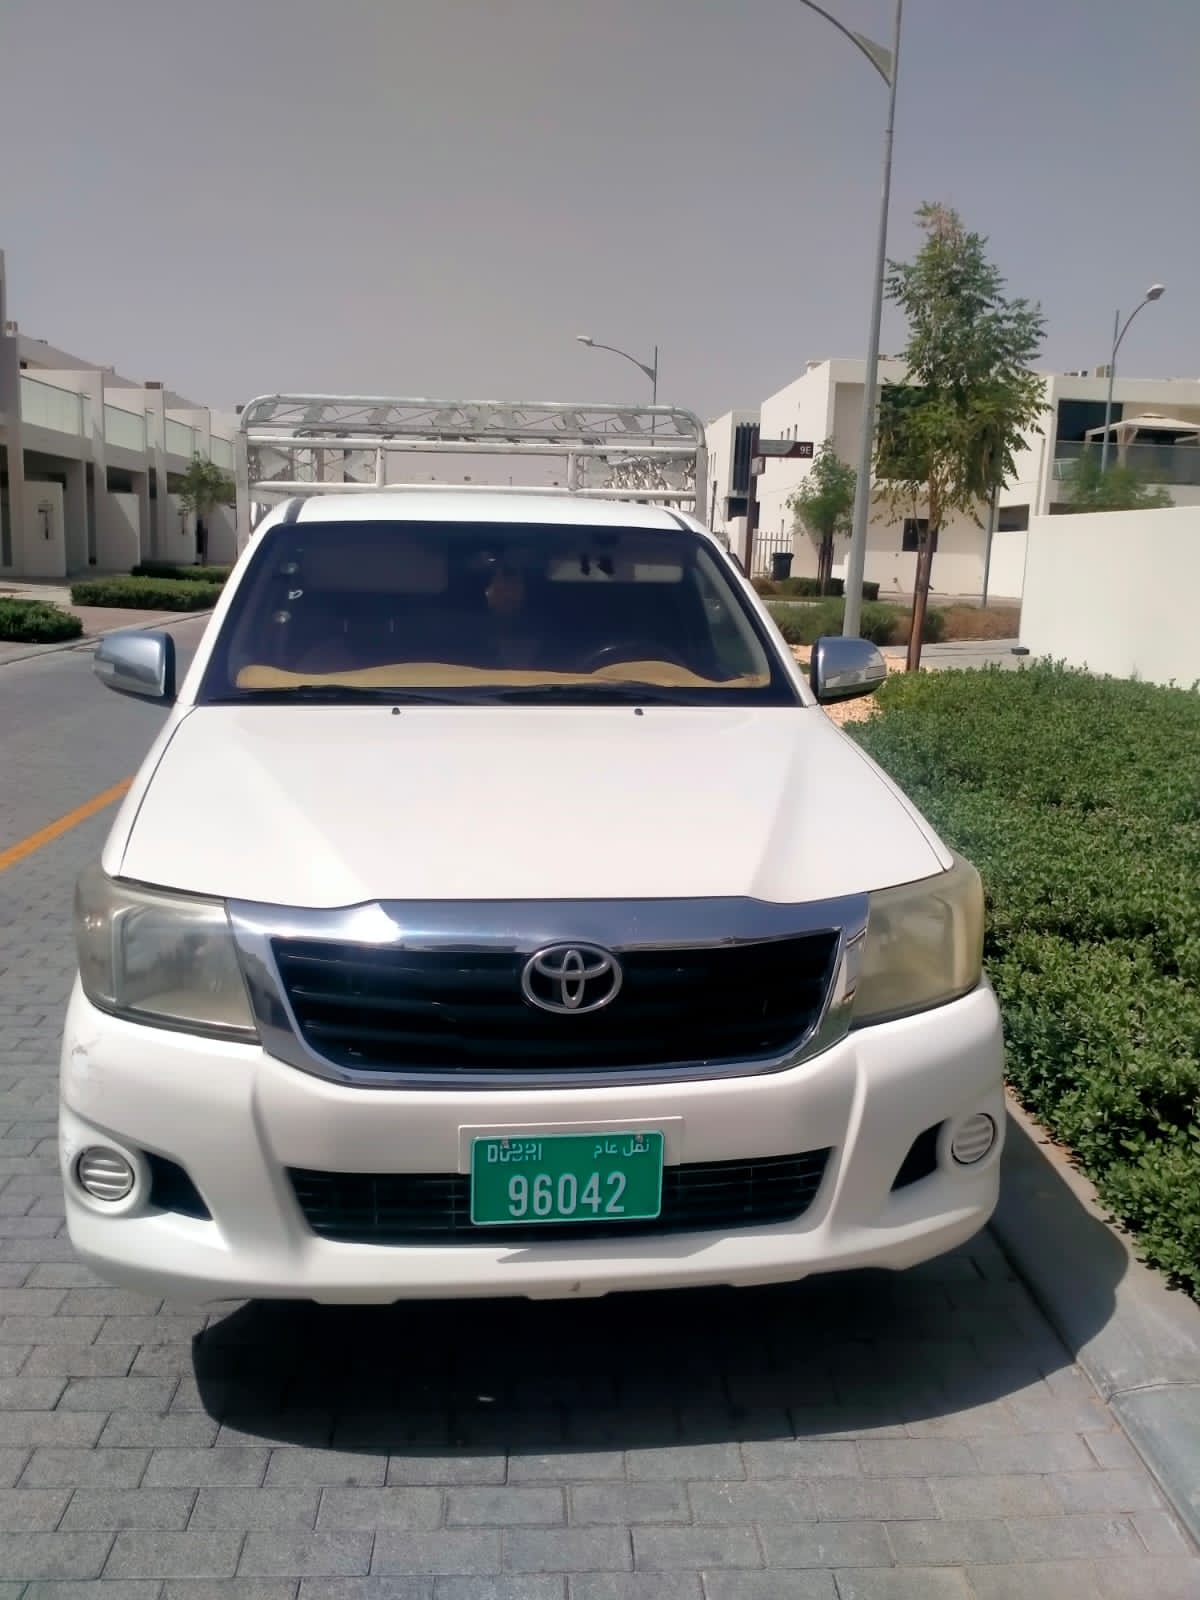 Movers and Packers in Business Bay, Movers and Packers in Palm Jumeirah, 0509883158., Movers in Al Barsha 1 | Movers And Packers In Ras Al Khaimah | Movers and Packers in Business Bay | Movers and Packers in Ajman | House Movers in Dubai | 3 Ton Pickup For Rent in Dubai | 3 Ton Pickup For Rent in Dubai | 1 Ton Pickup For Rent in Dubai